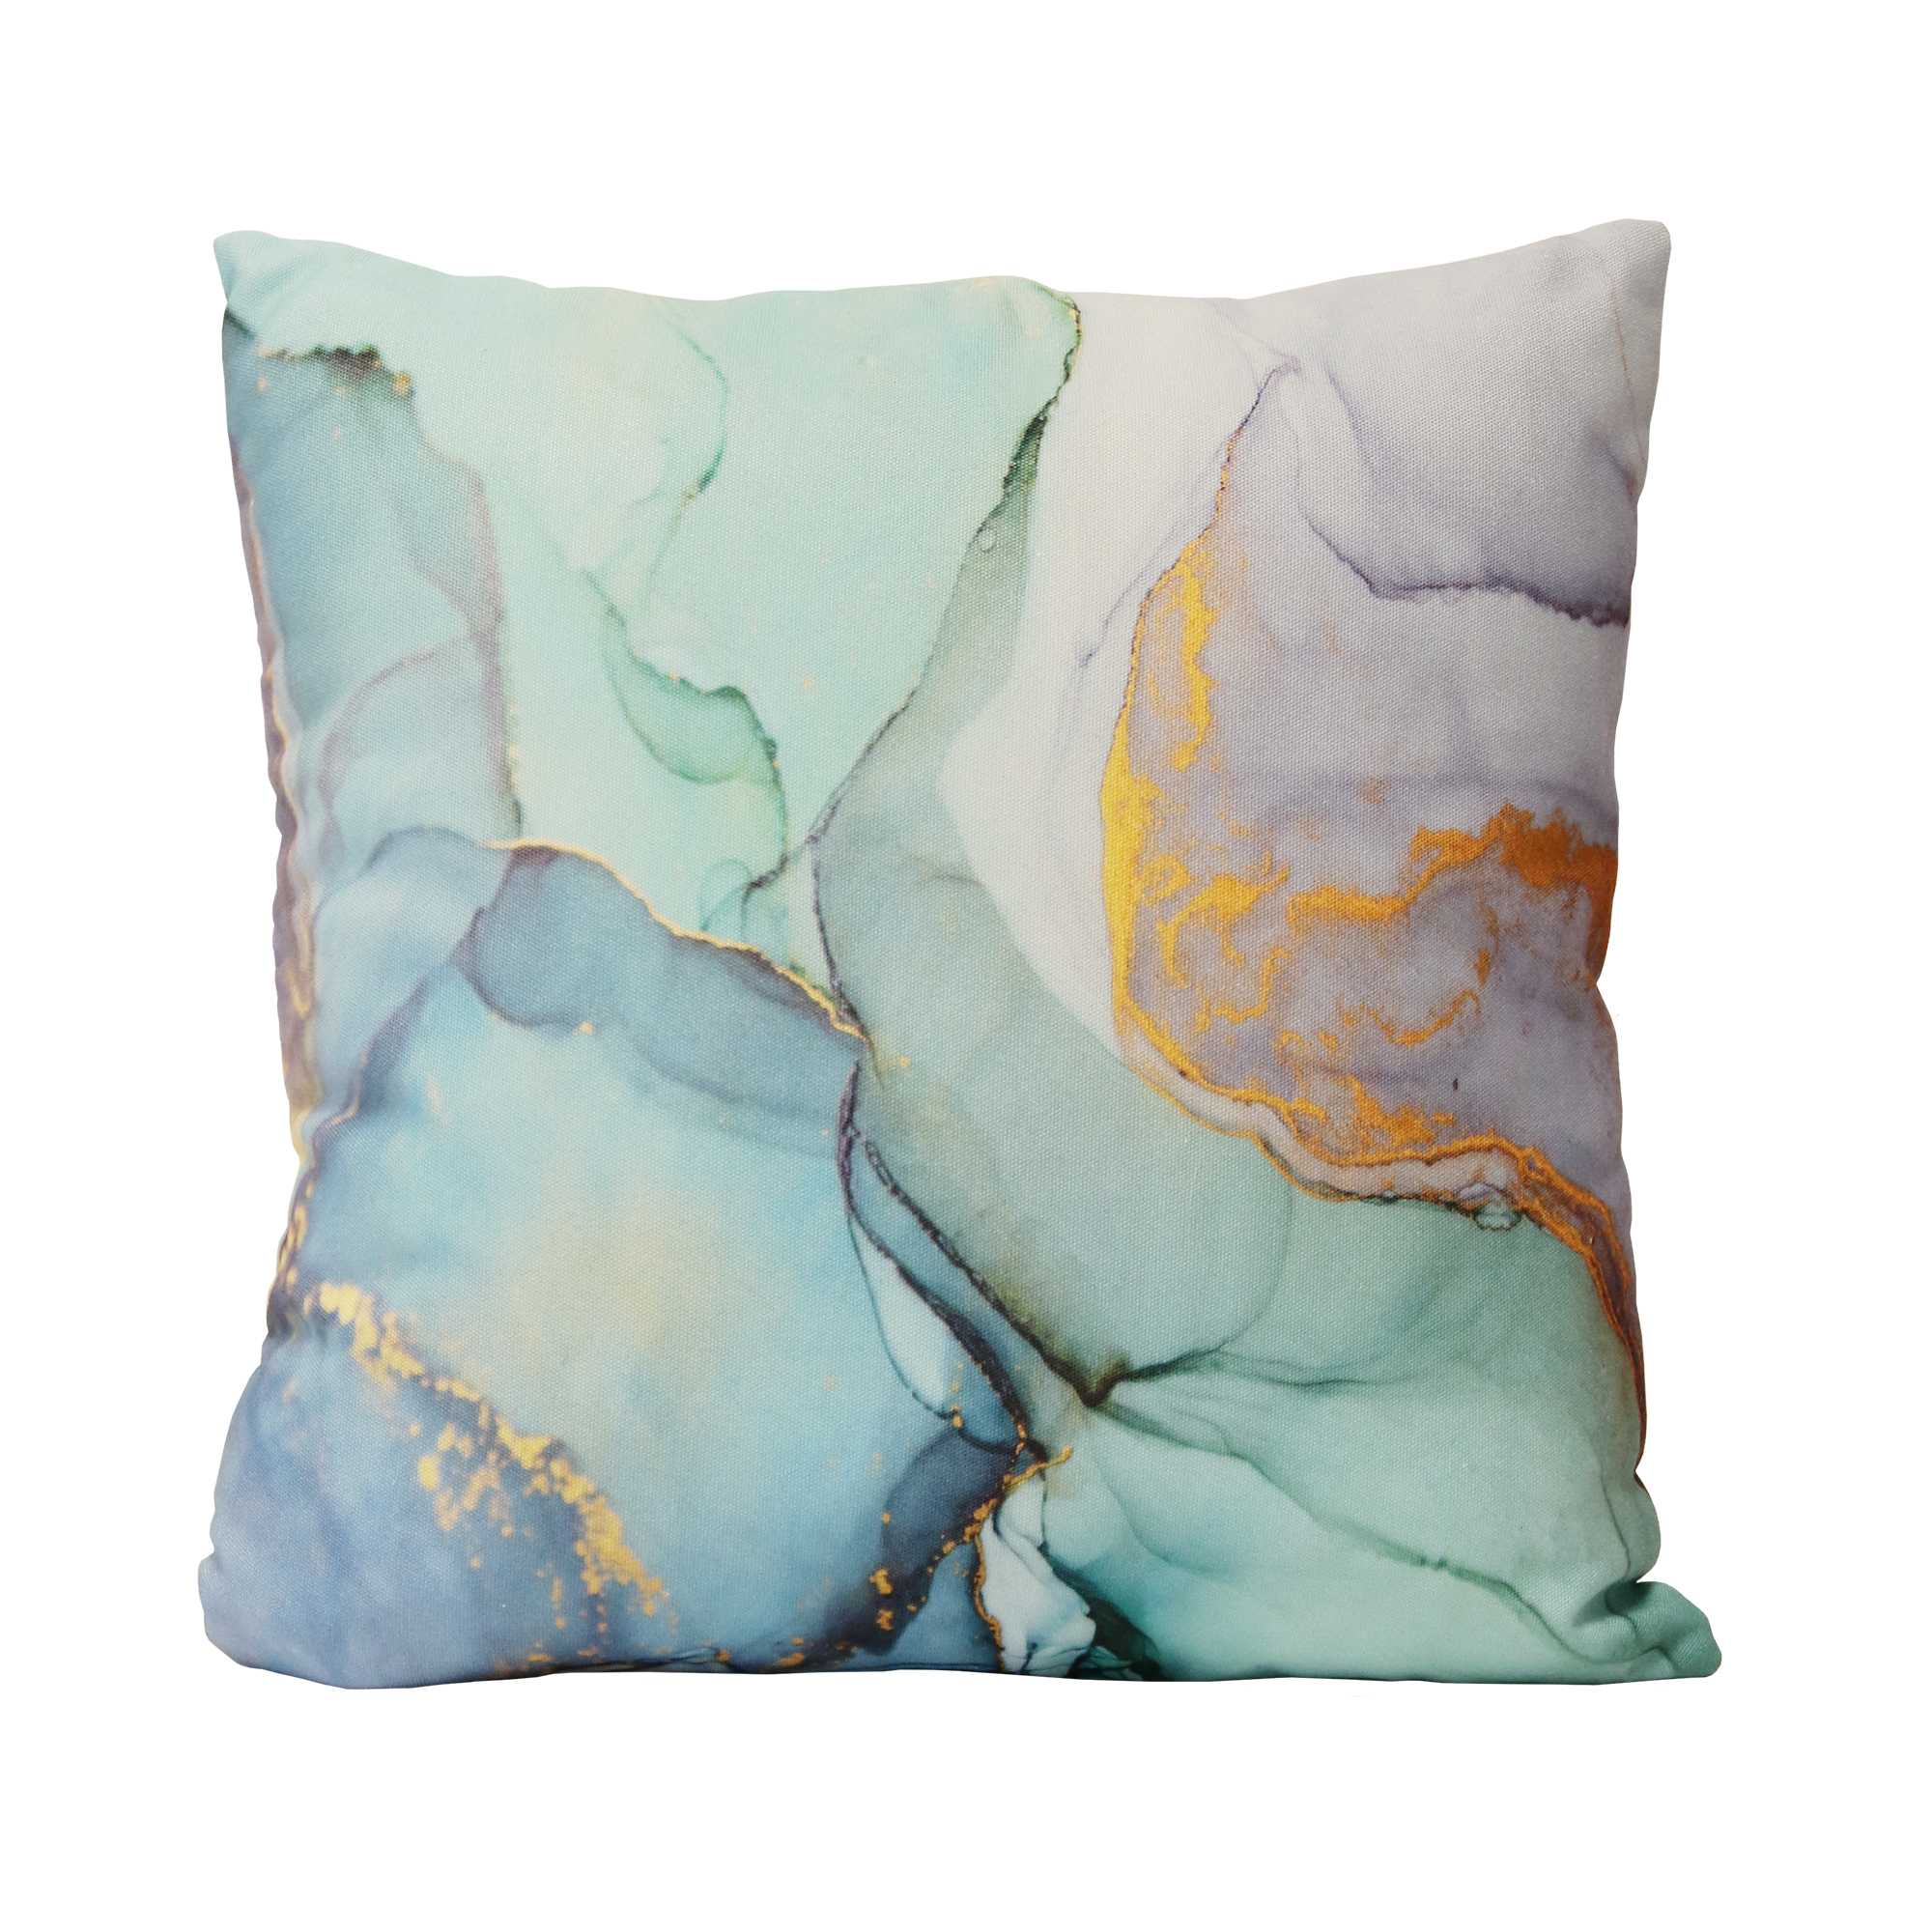 18" Blue and Green Marble Cotton Throw Pillow